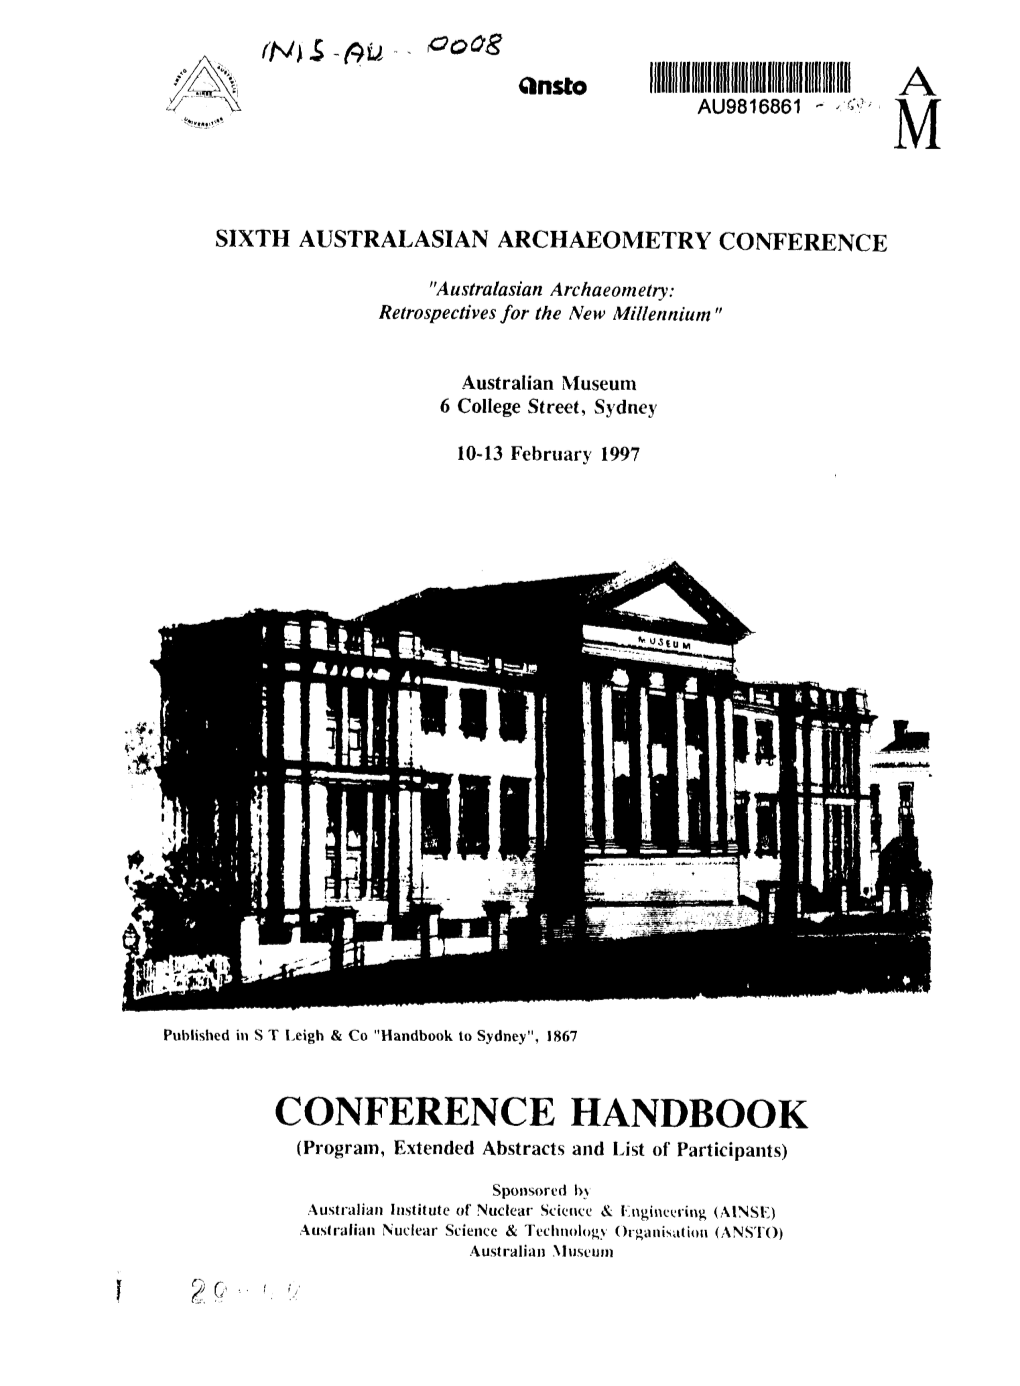 CONFERENCE HANDBOOK (Program, Extended Abstracts and List of Participants)